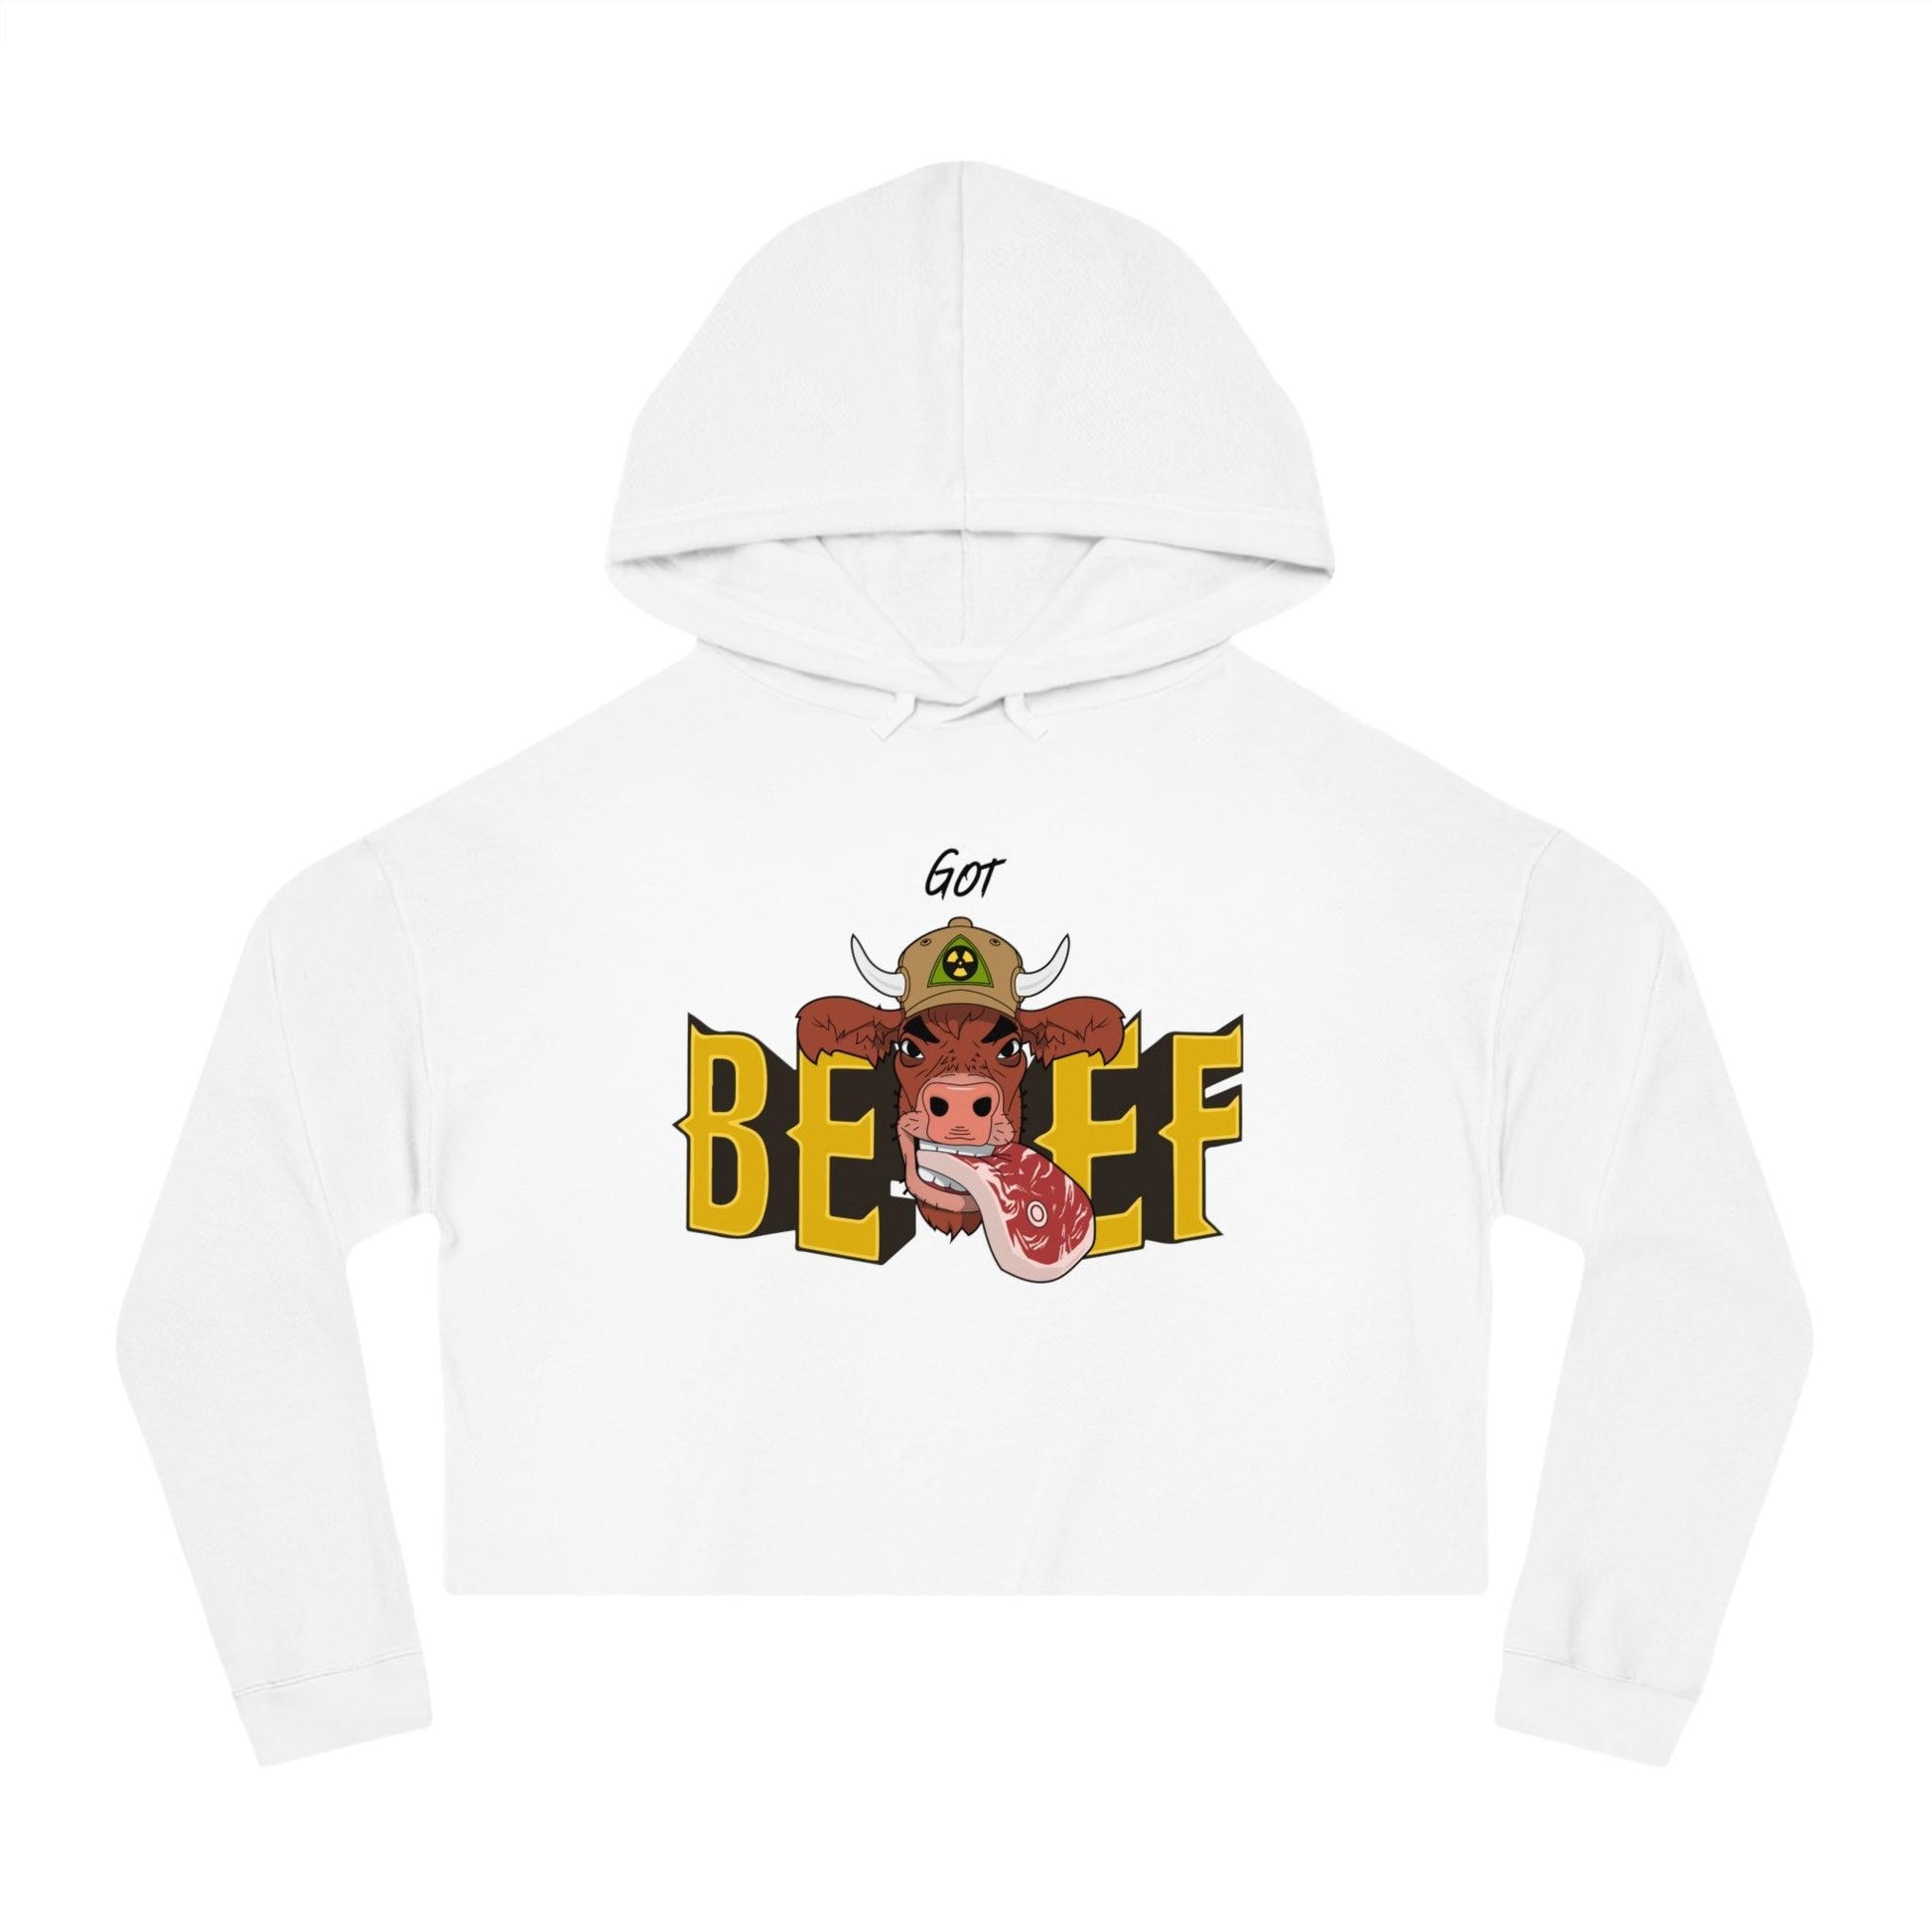 I Crave Beef - Women’s Cropped Hooded Sweatshirt - Shaneinvasion